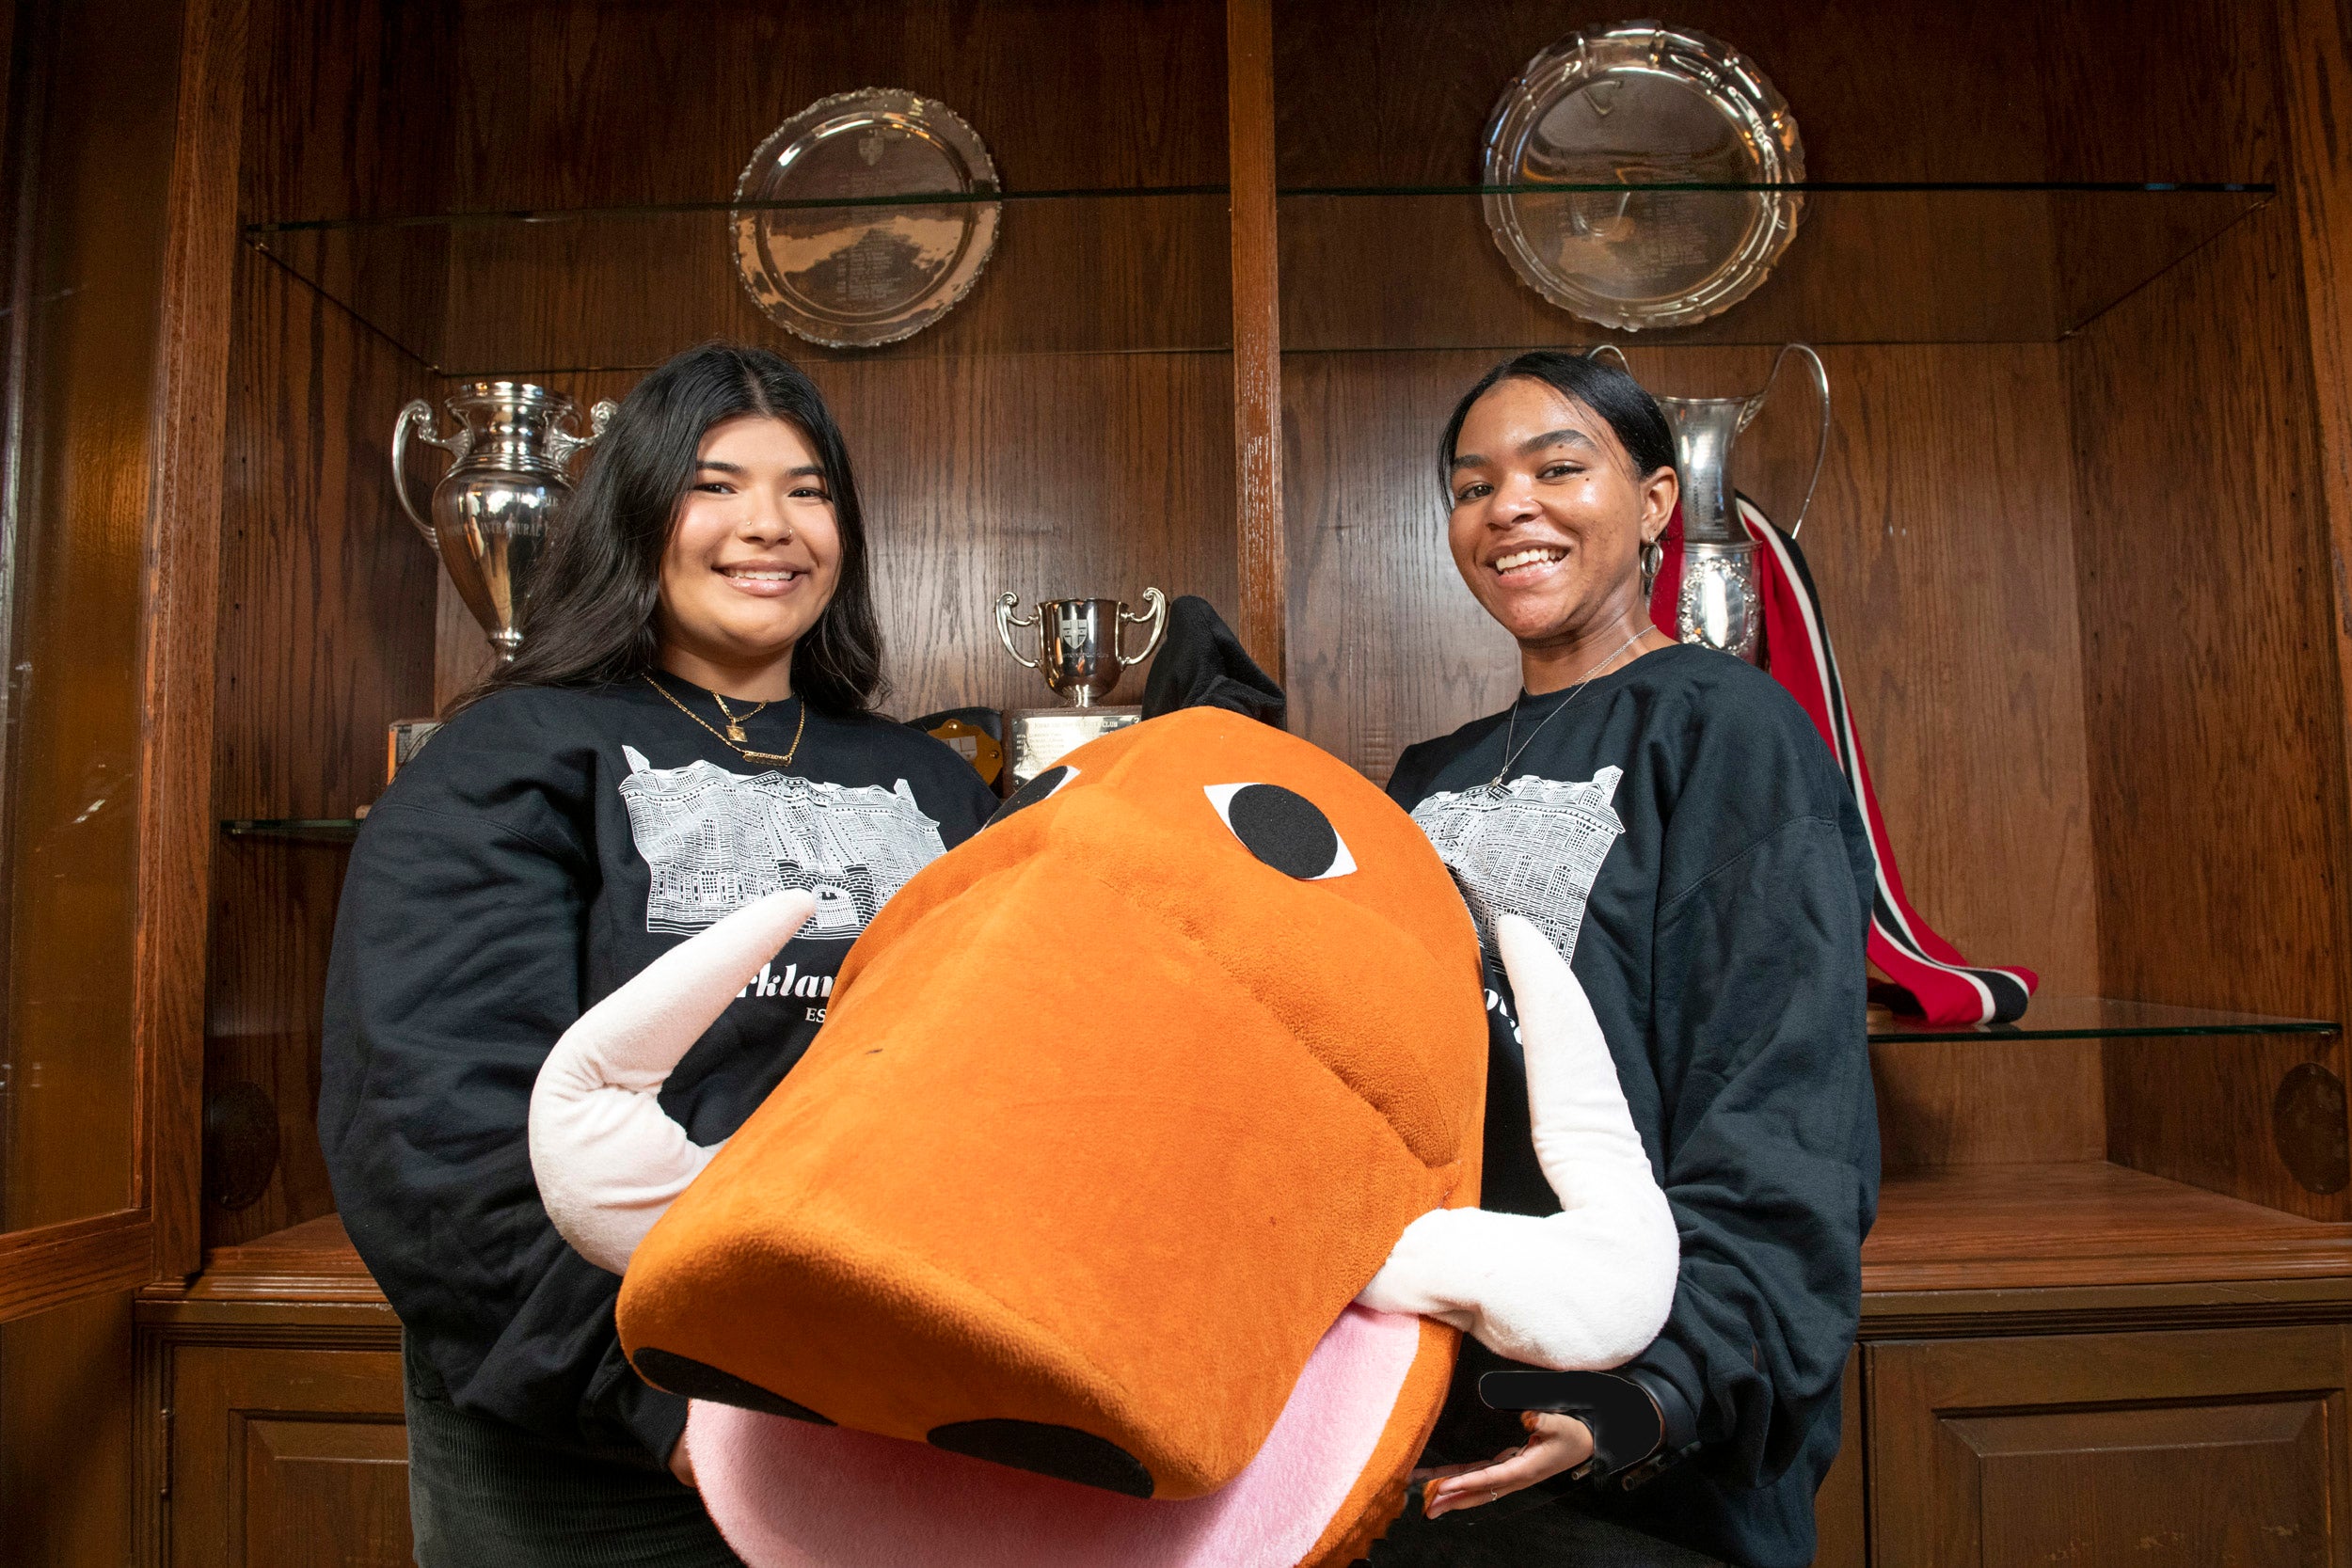 Giselle Chiprez (left) and Nena King with their boar mascot costume in front of a trophy case in the Kirkland House Junior Common Room.